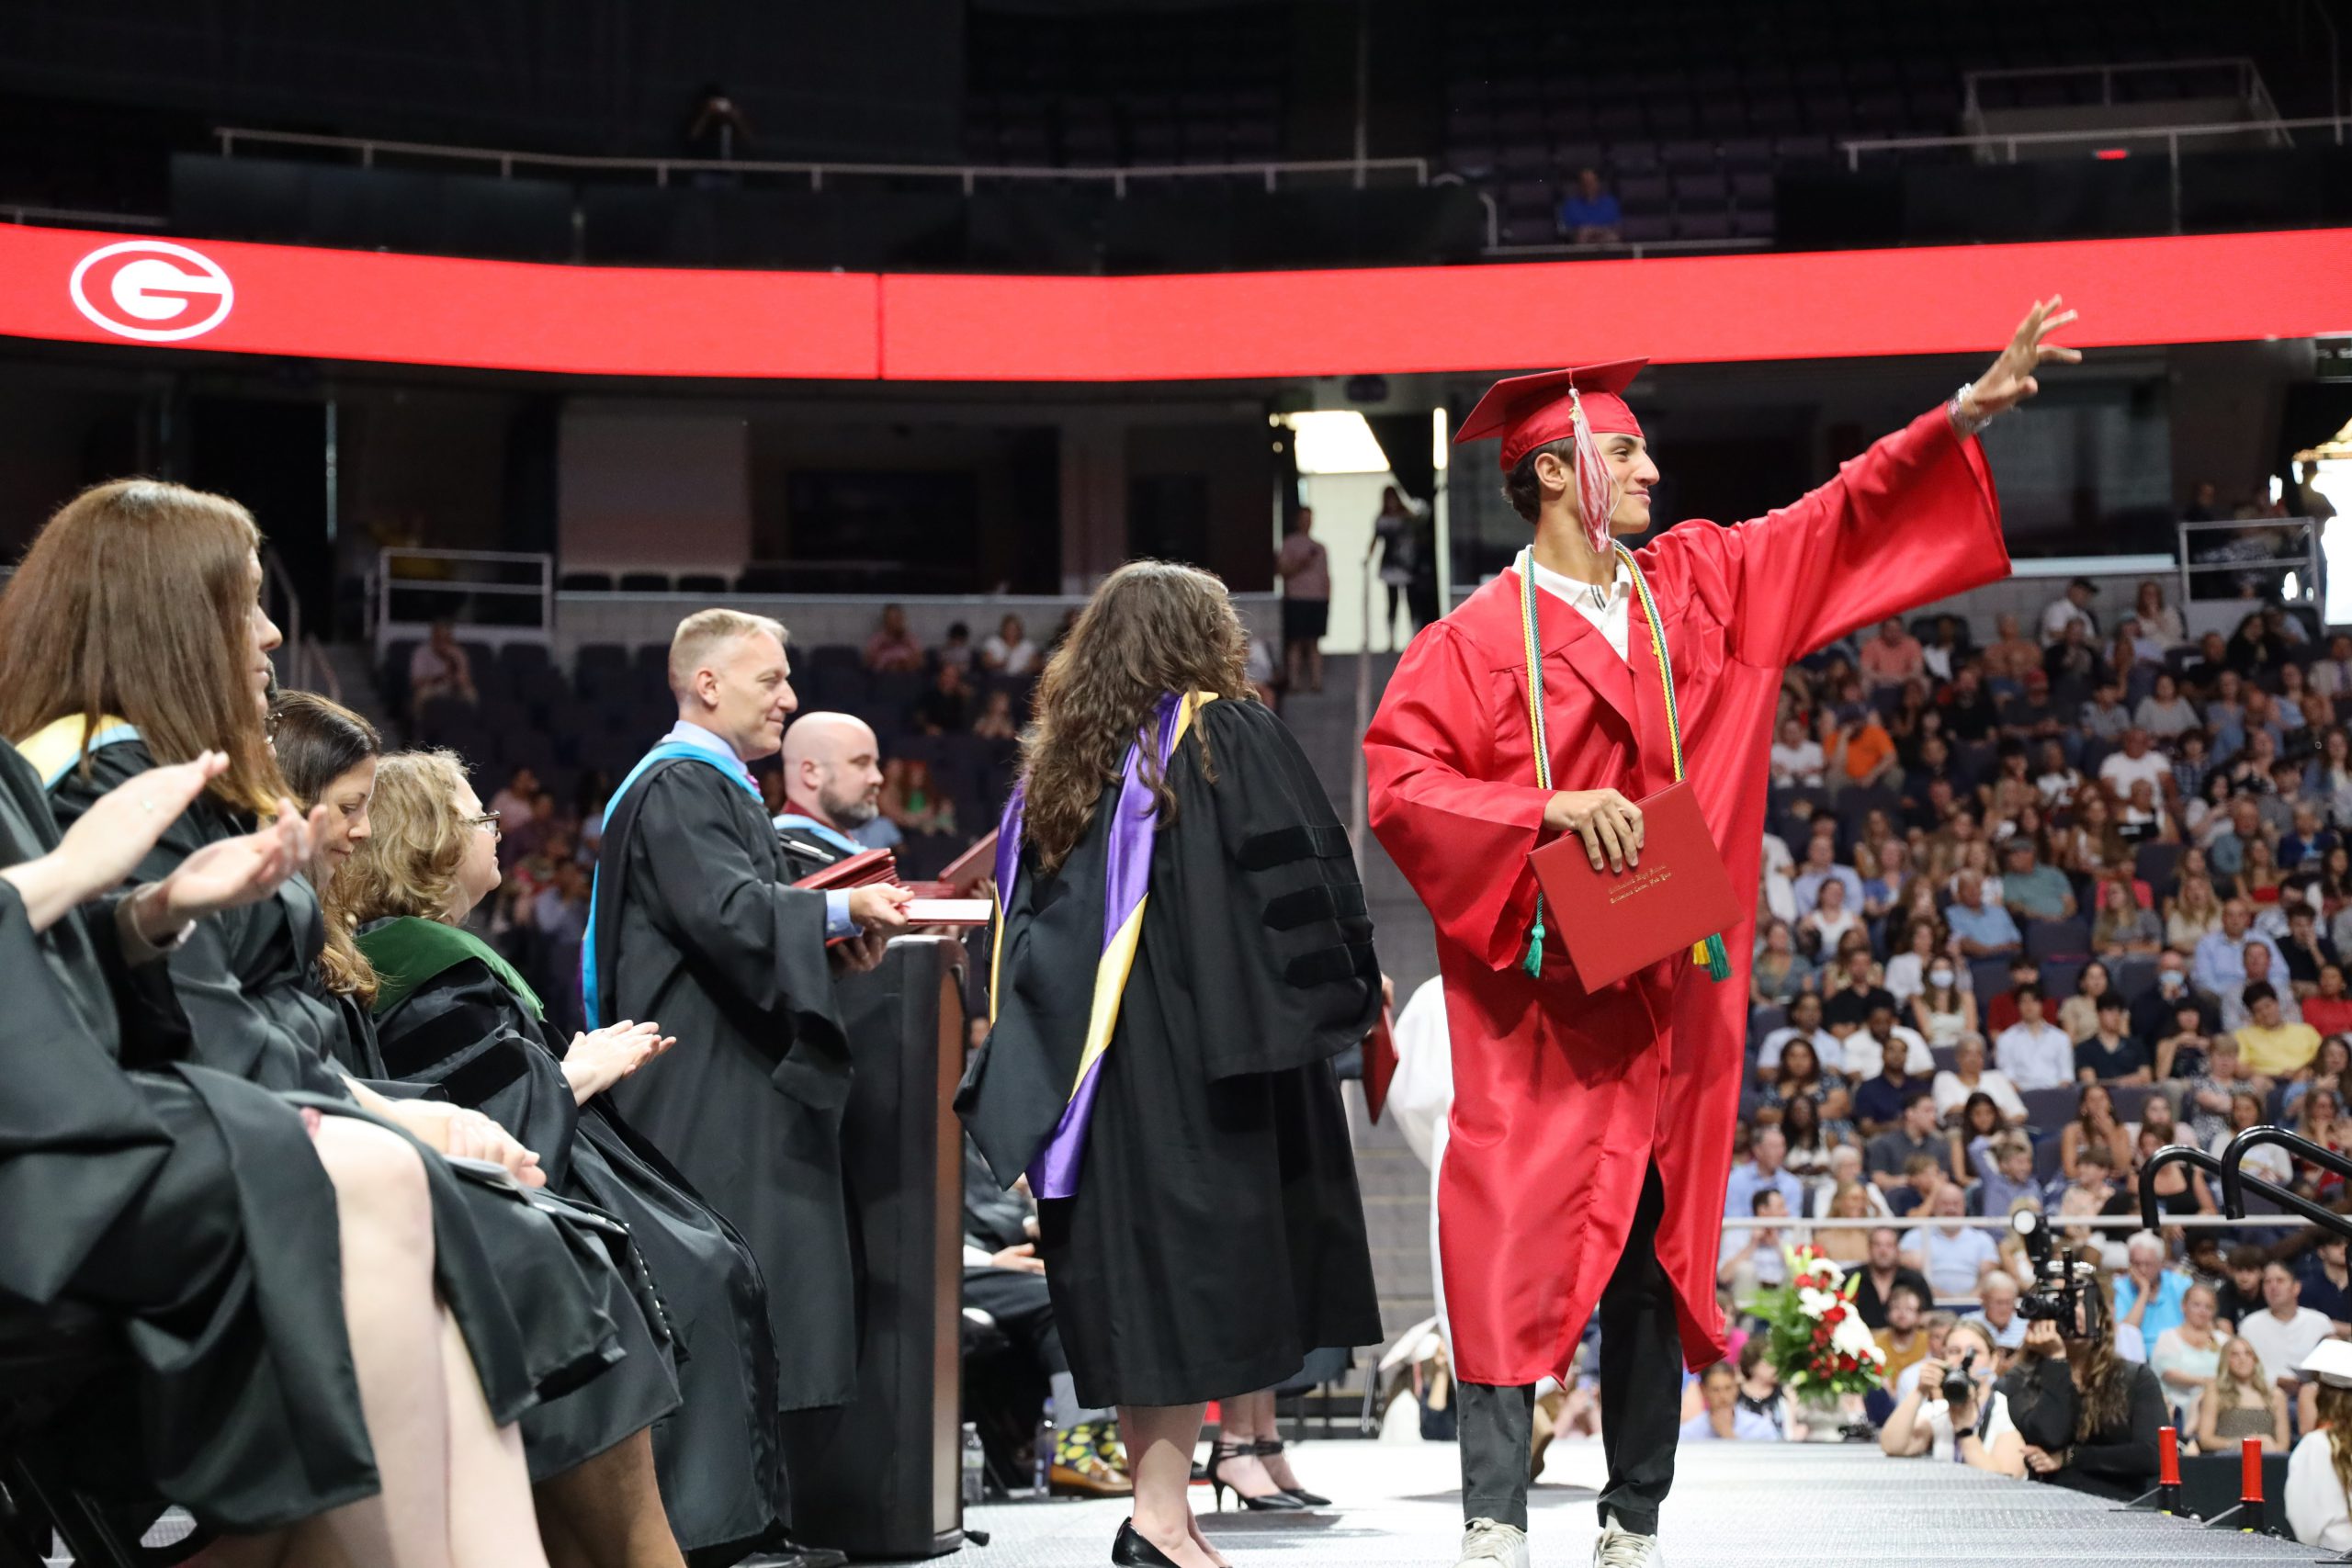 A students wearing a red cap and gown waves at the crowd after just receiving a diploma